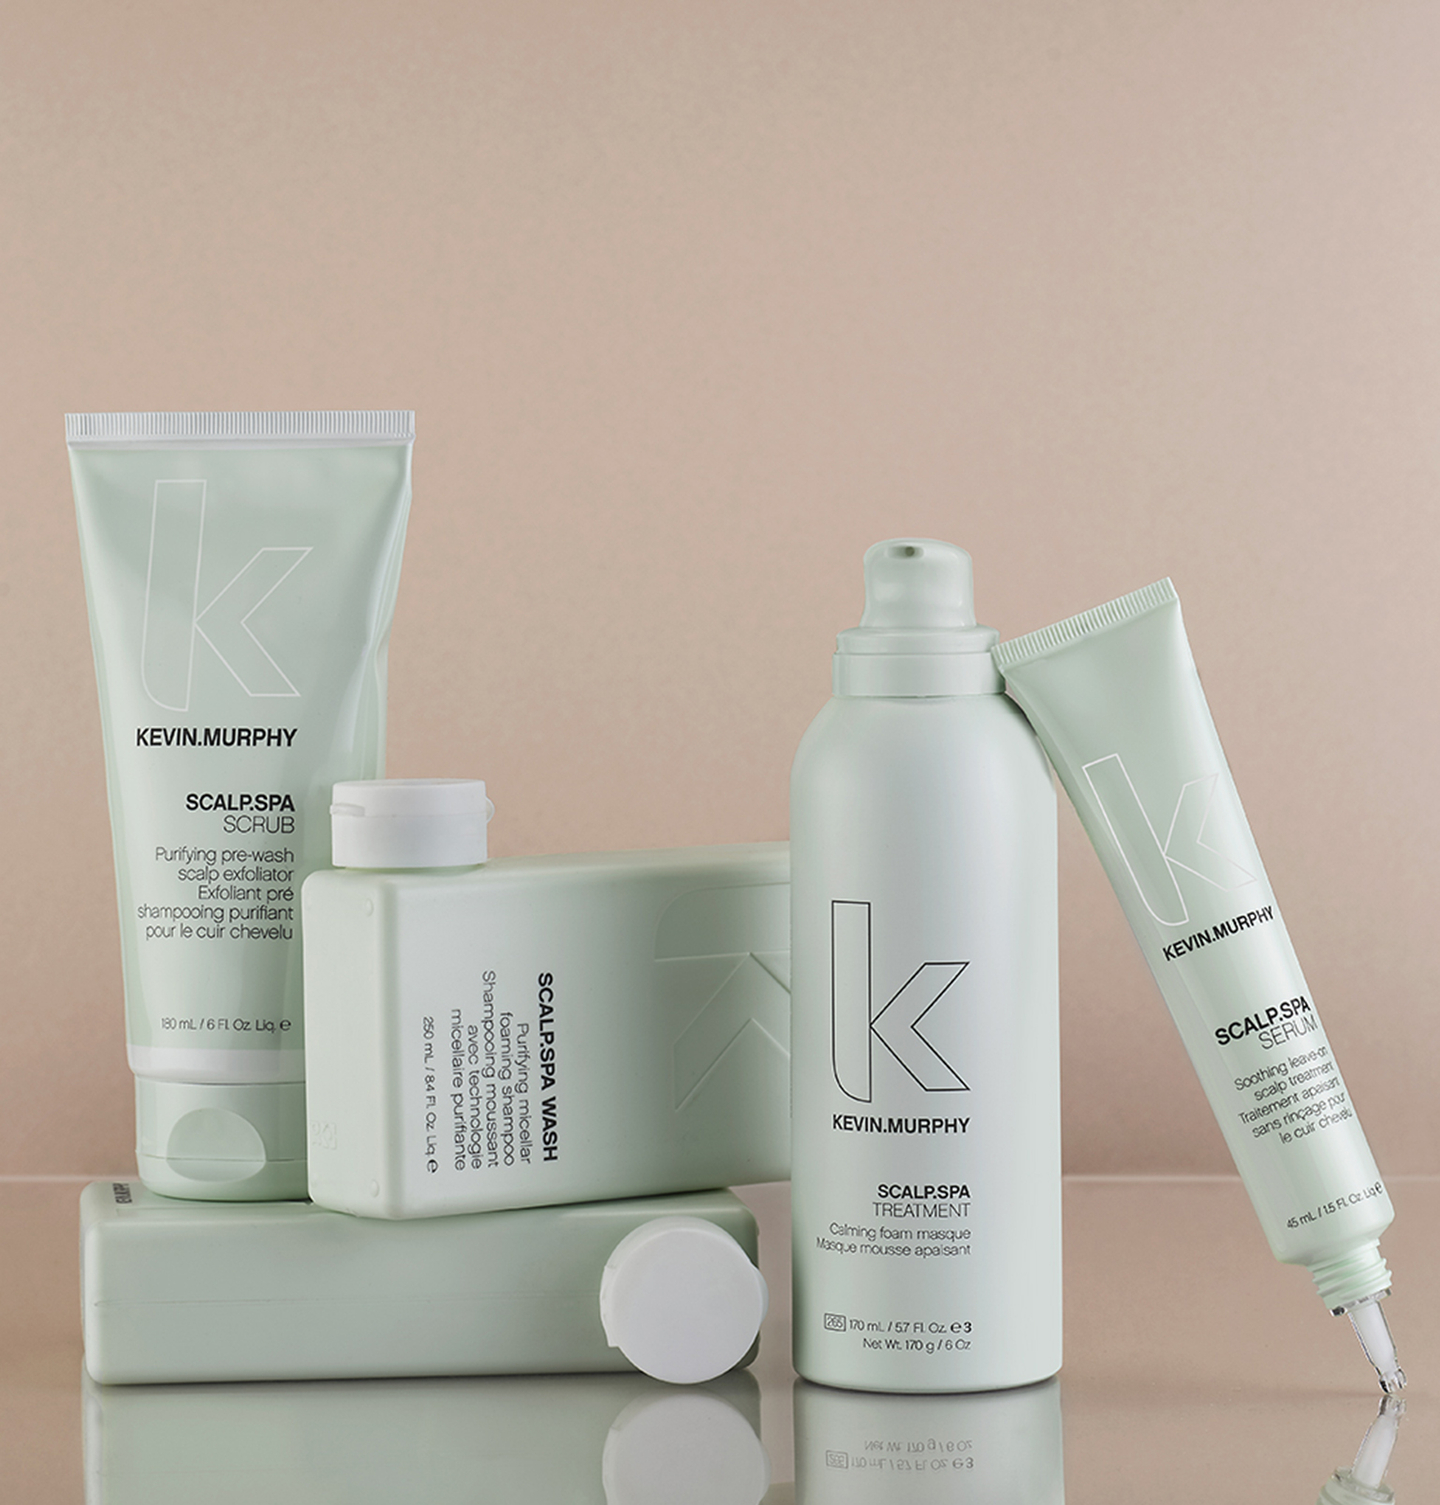 Collection of Kevin.Murphy ScalpSpa products including scrub, wash, serum, and treatment